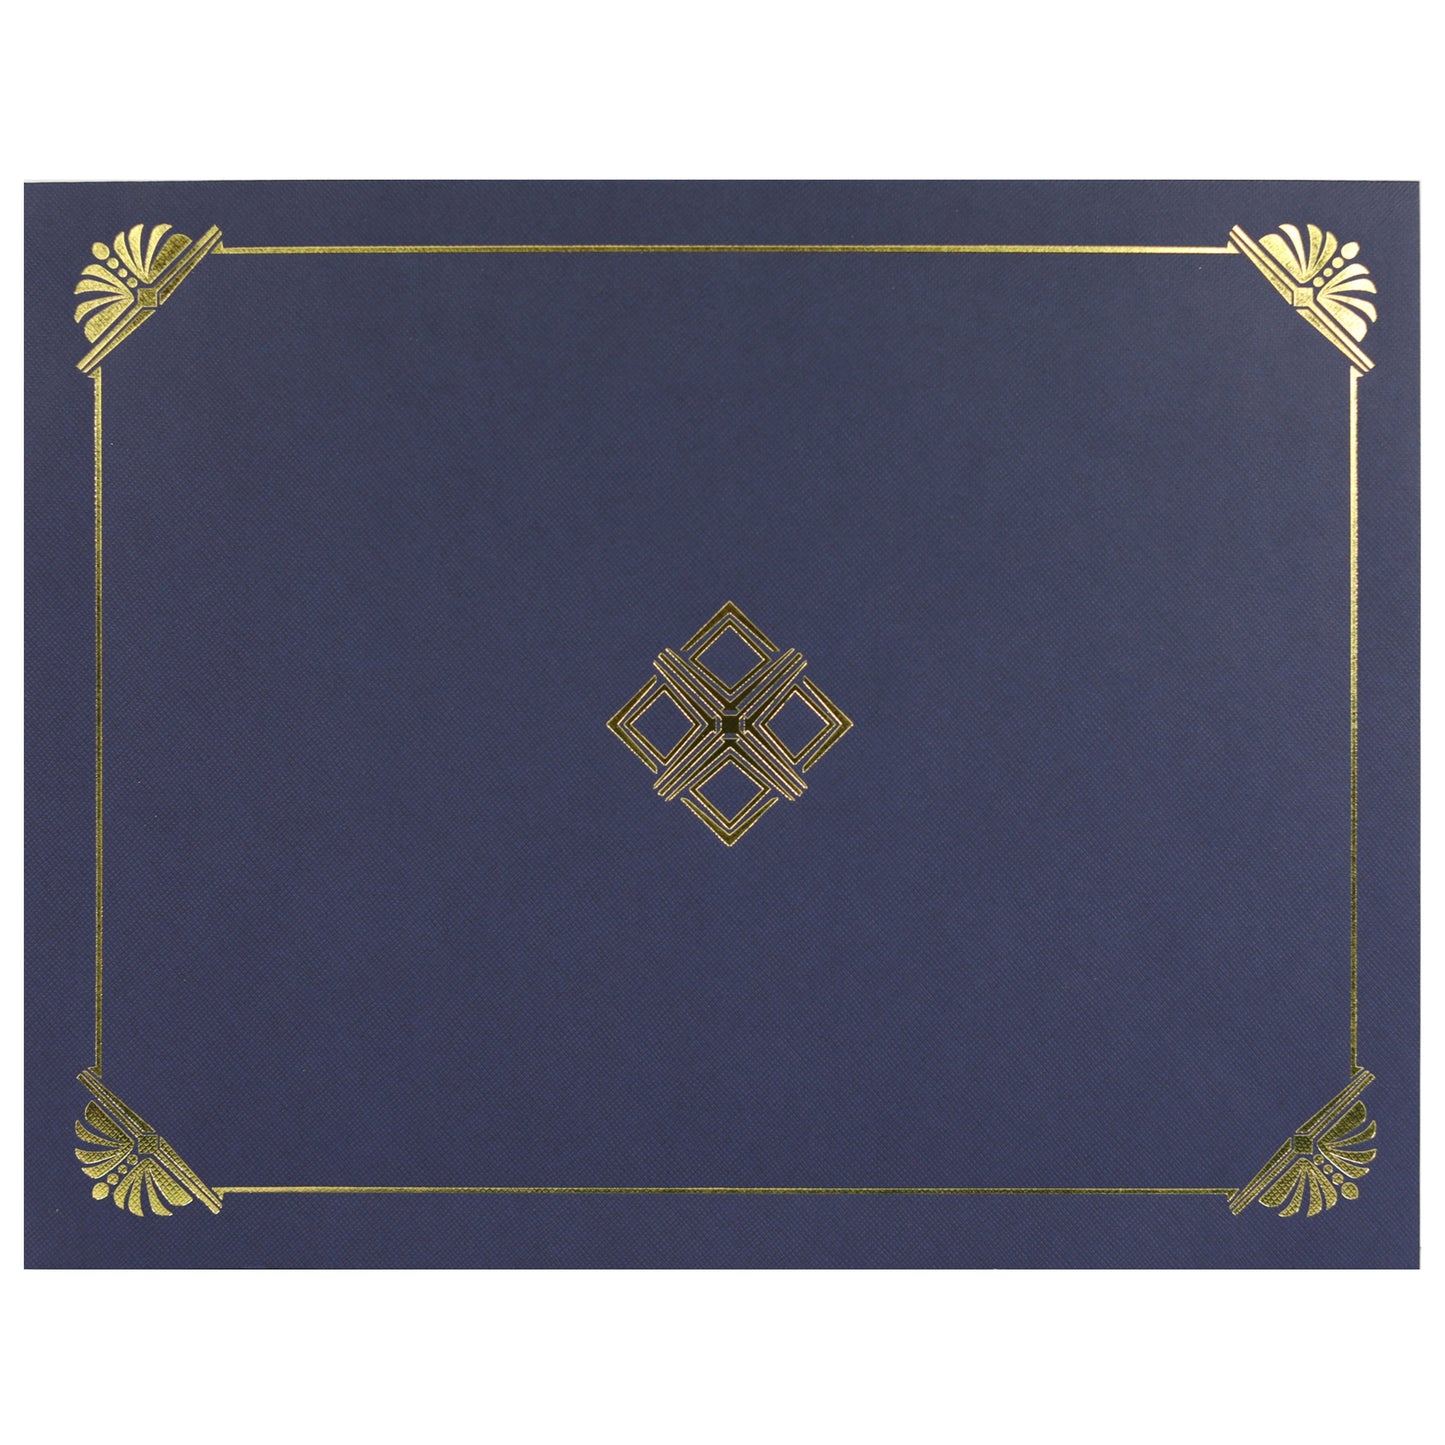 St. James® Certificate Holders/Document Covers/Diploma Holders, Navy Blue, Gold Foil, Linen Finish, Pack of 5